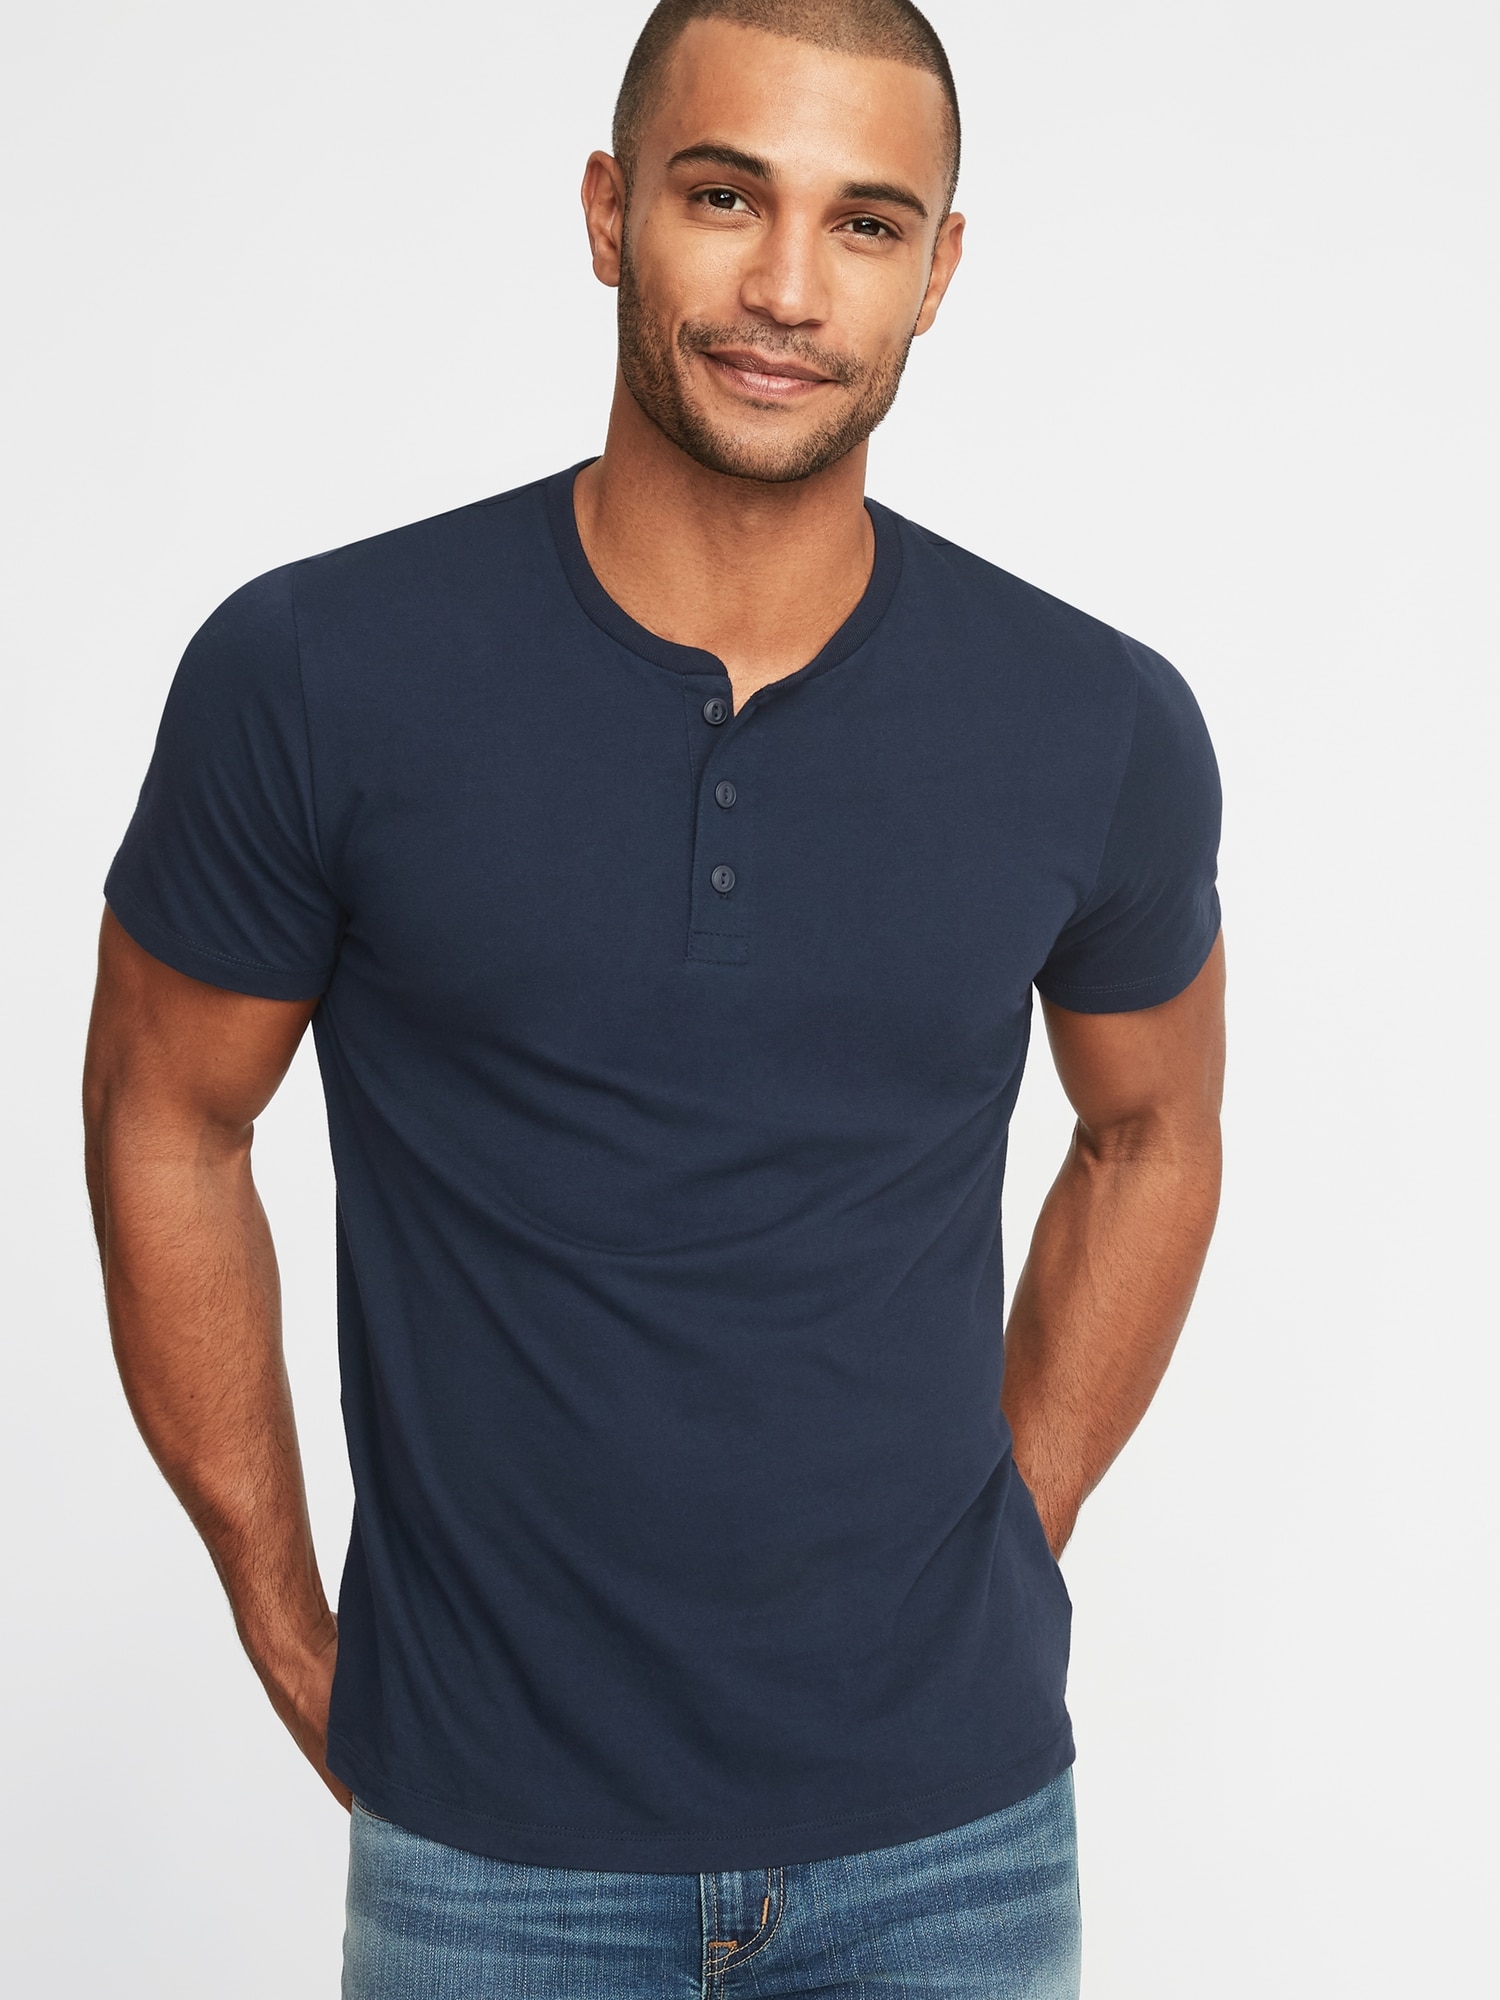 Soft-Washed Jersey Henley for Men | Old Navy